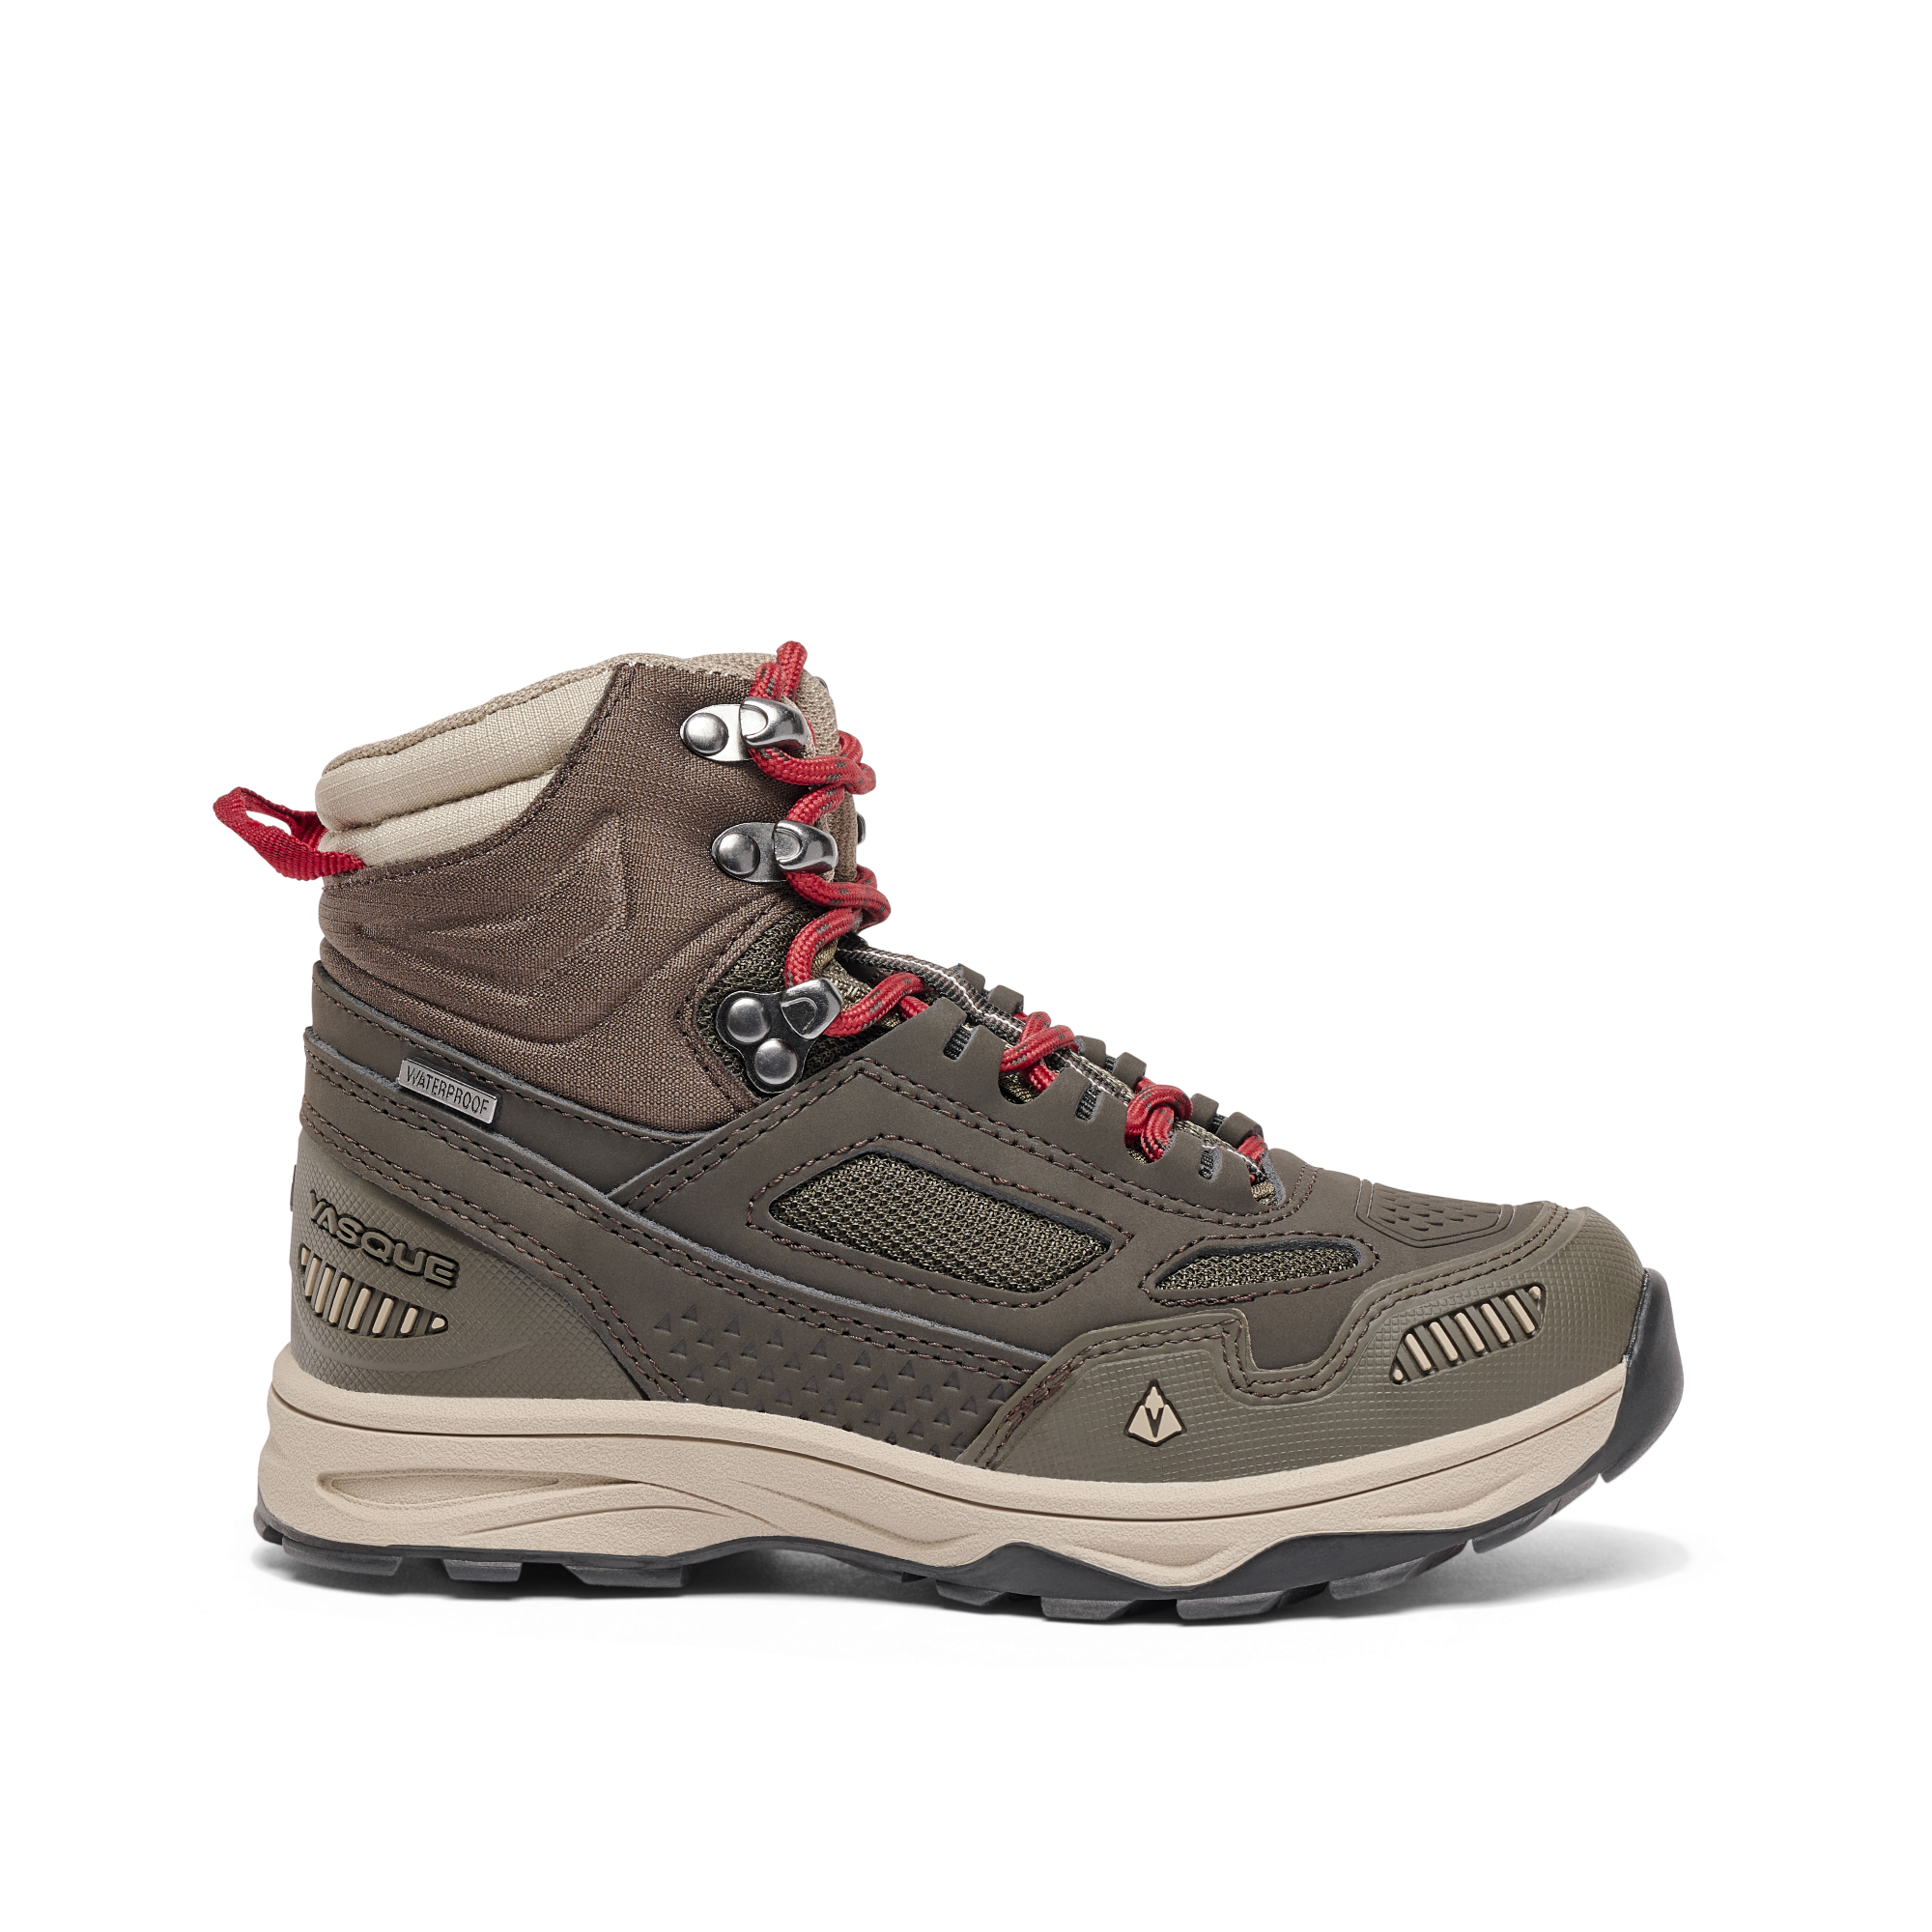 Vasque Breeze AT UltraDry Waterproof Hiking Boots for Kids - Olive - 3 Kids